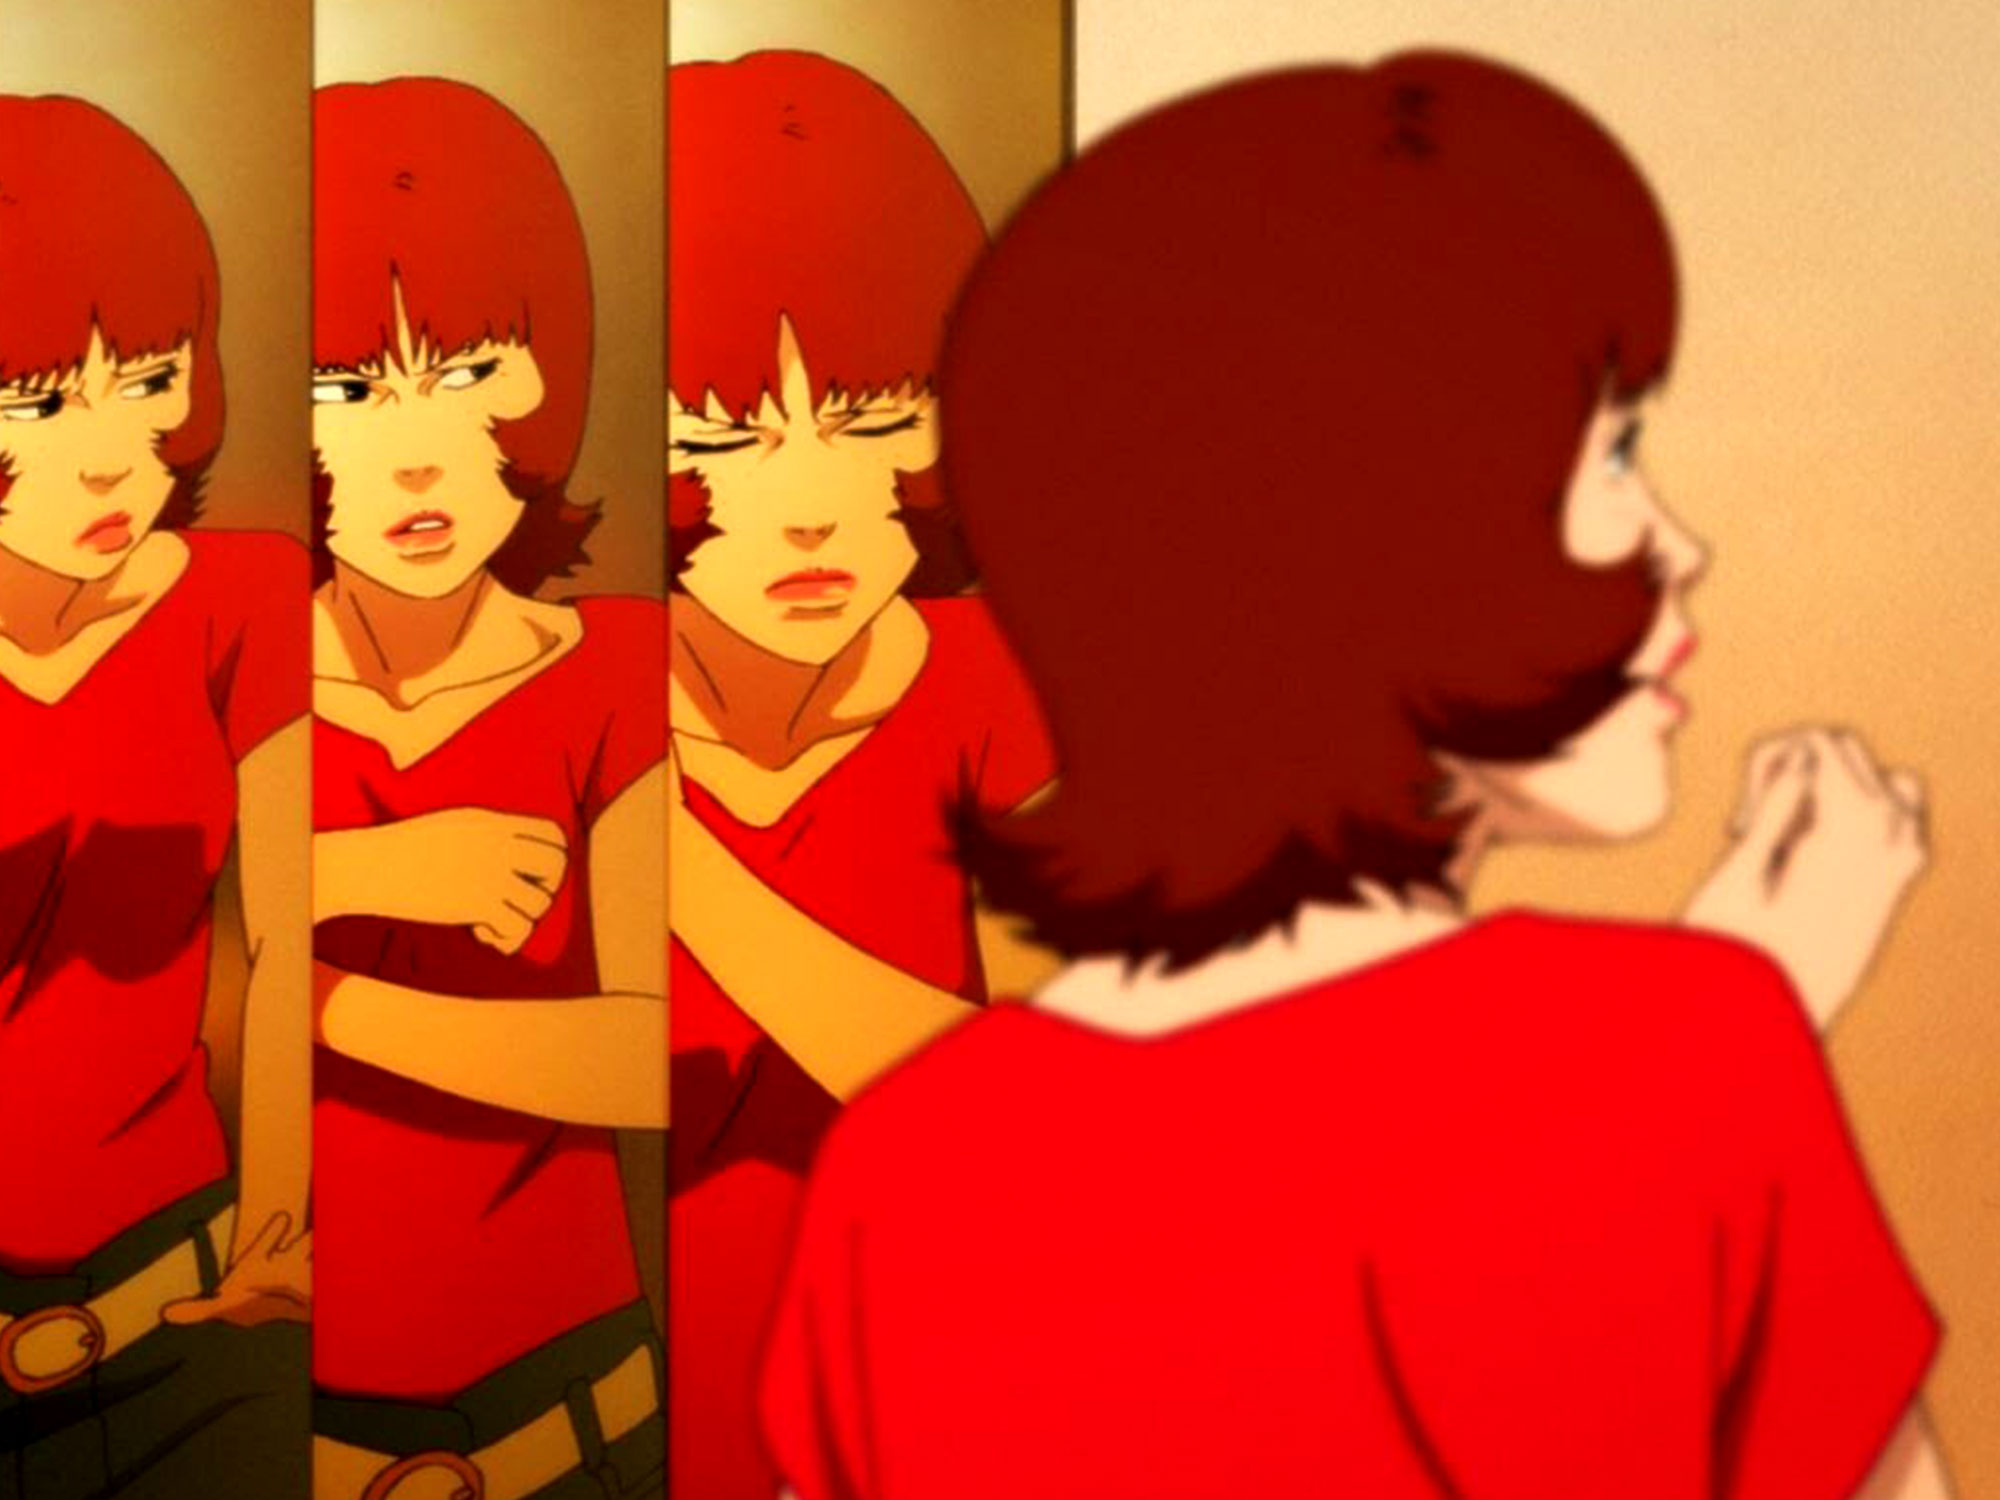 Satoshi Kon: The Illusionist is an emotional look at a virtuosic director